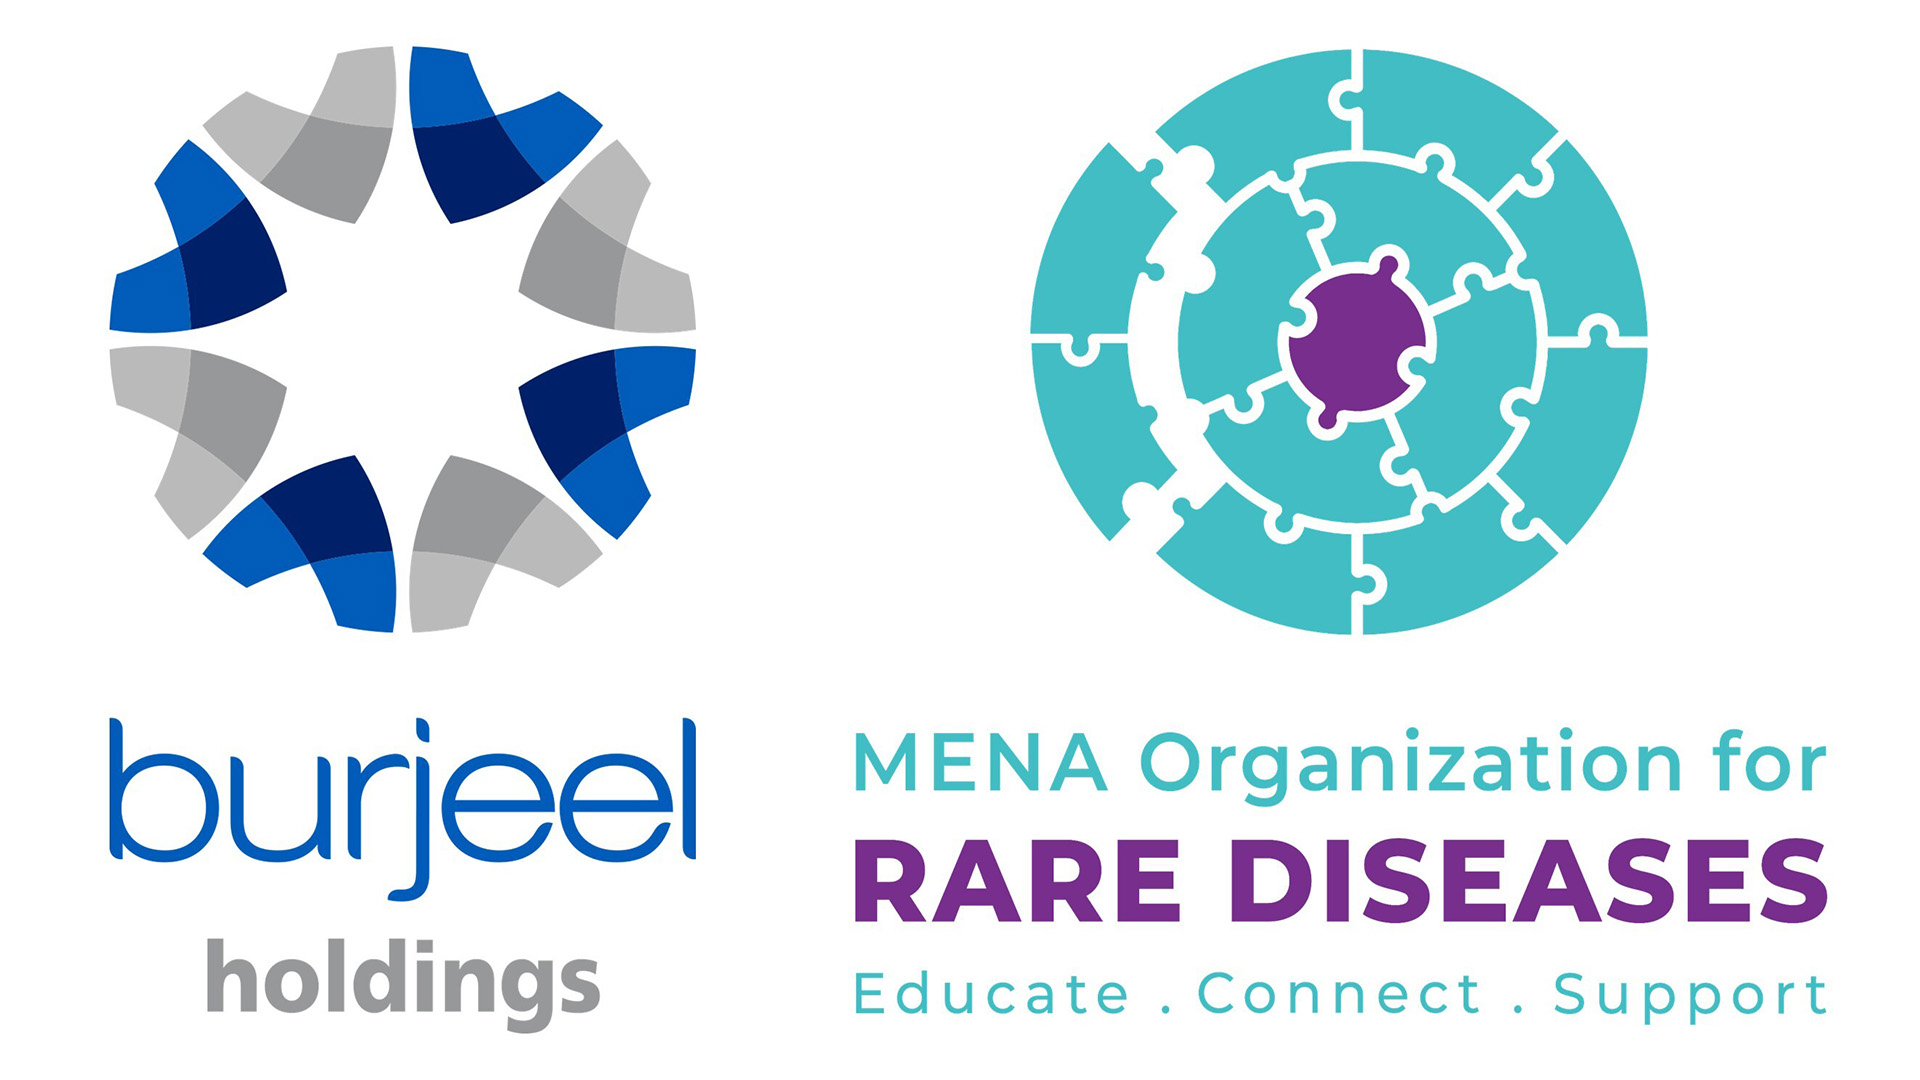 MENA Organisation for Rare Diseases, Burjeel Holdings collaborate to expand footprint of project NADER